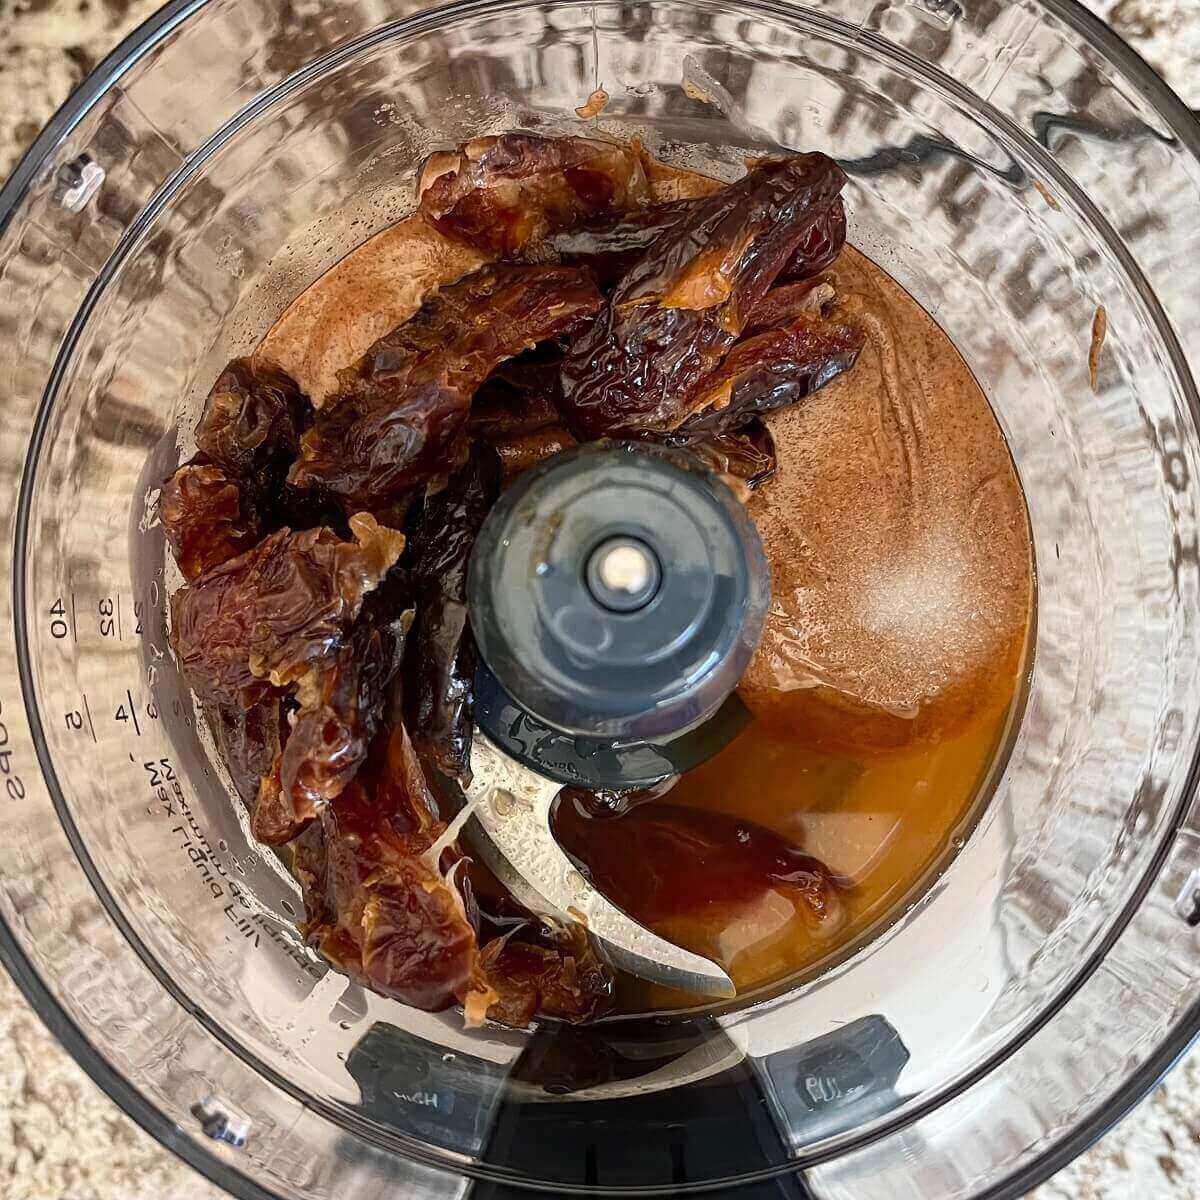 Dates, almond butter, and other ingredients in a food processor.